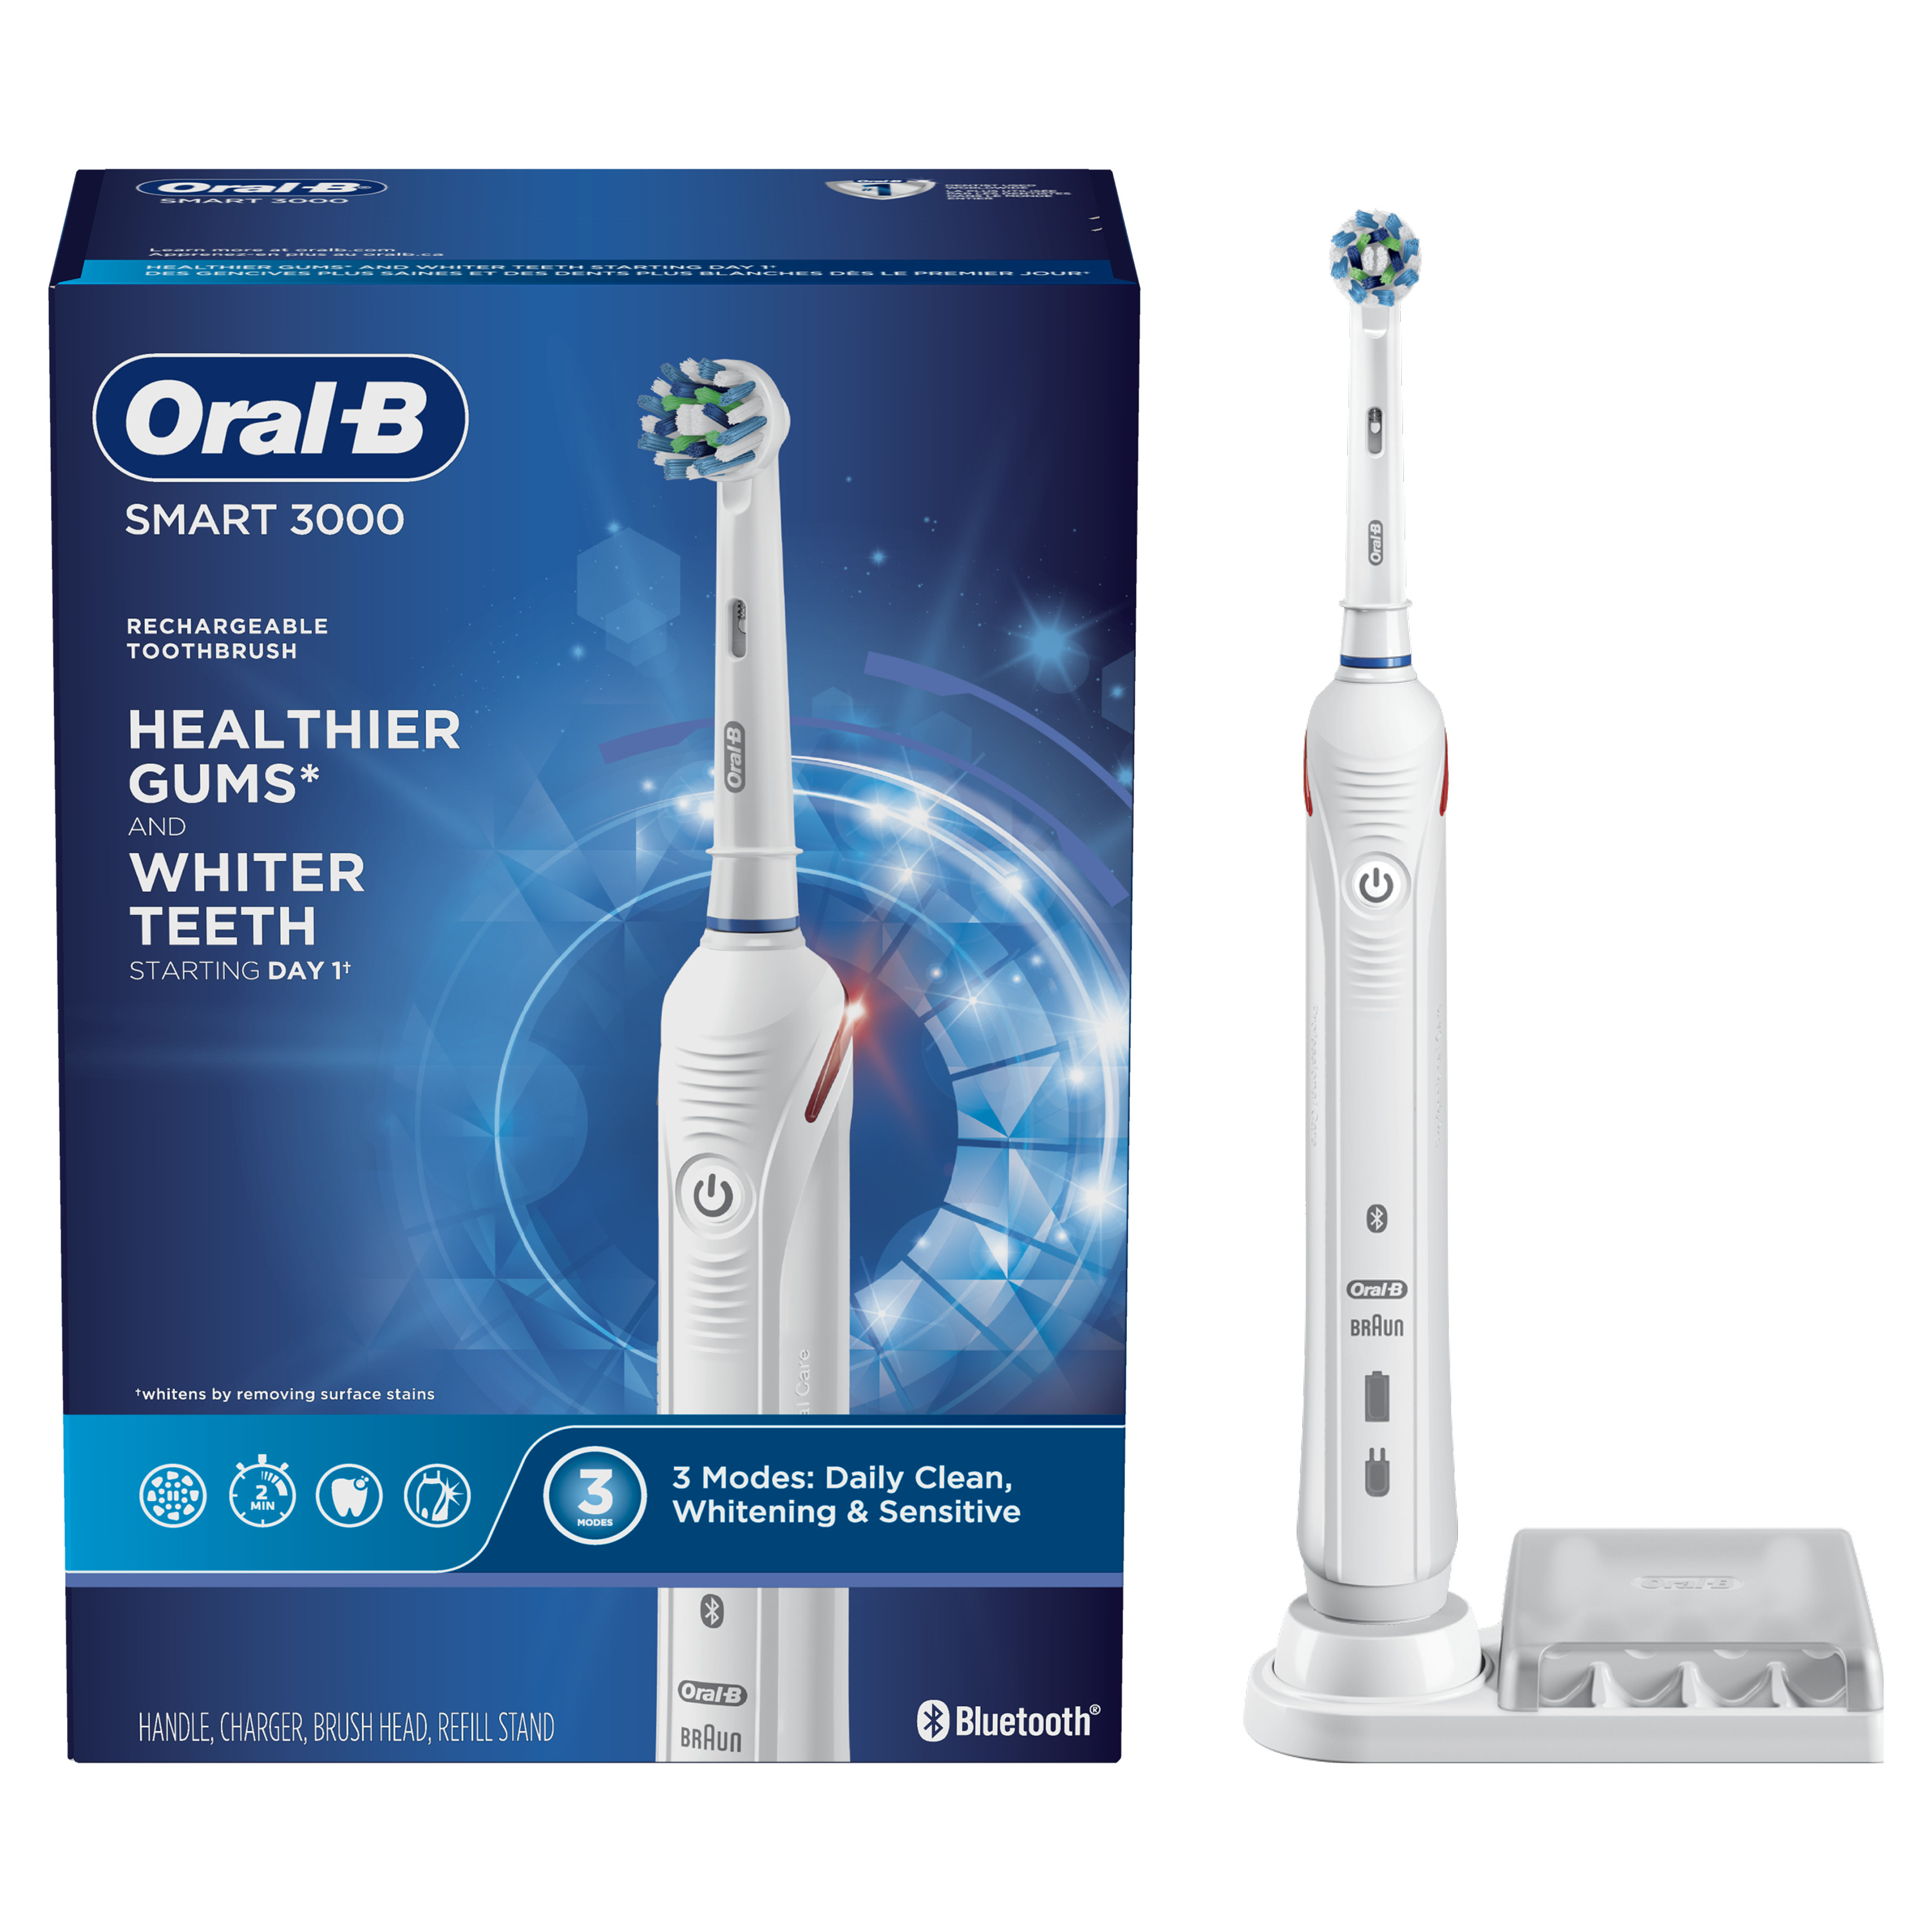 Oral-B Smart 3000 Rechargeable Electric Toothbrush, White, 1 Ct - image 1 of 6